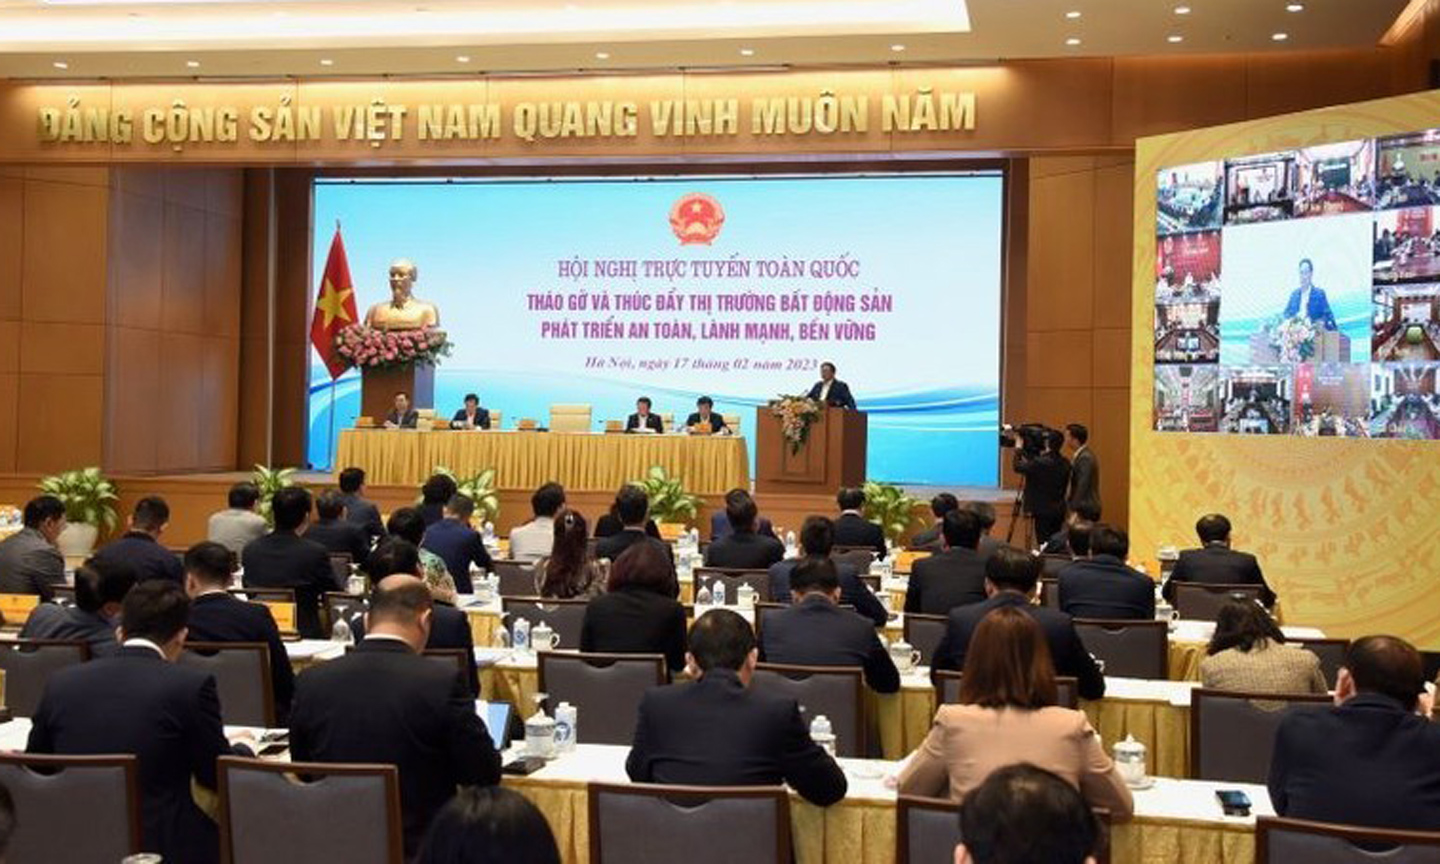 Prime Minister Pham Minh Chinh speaks at the conference. (Photo: Tran Hai).